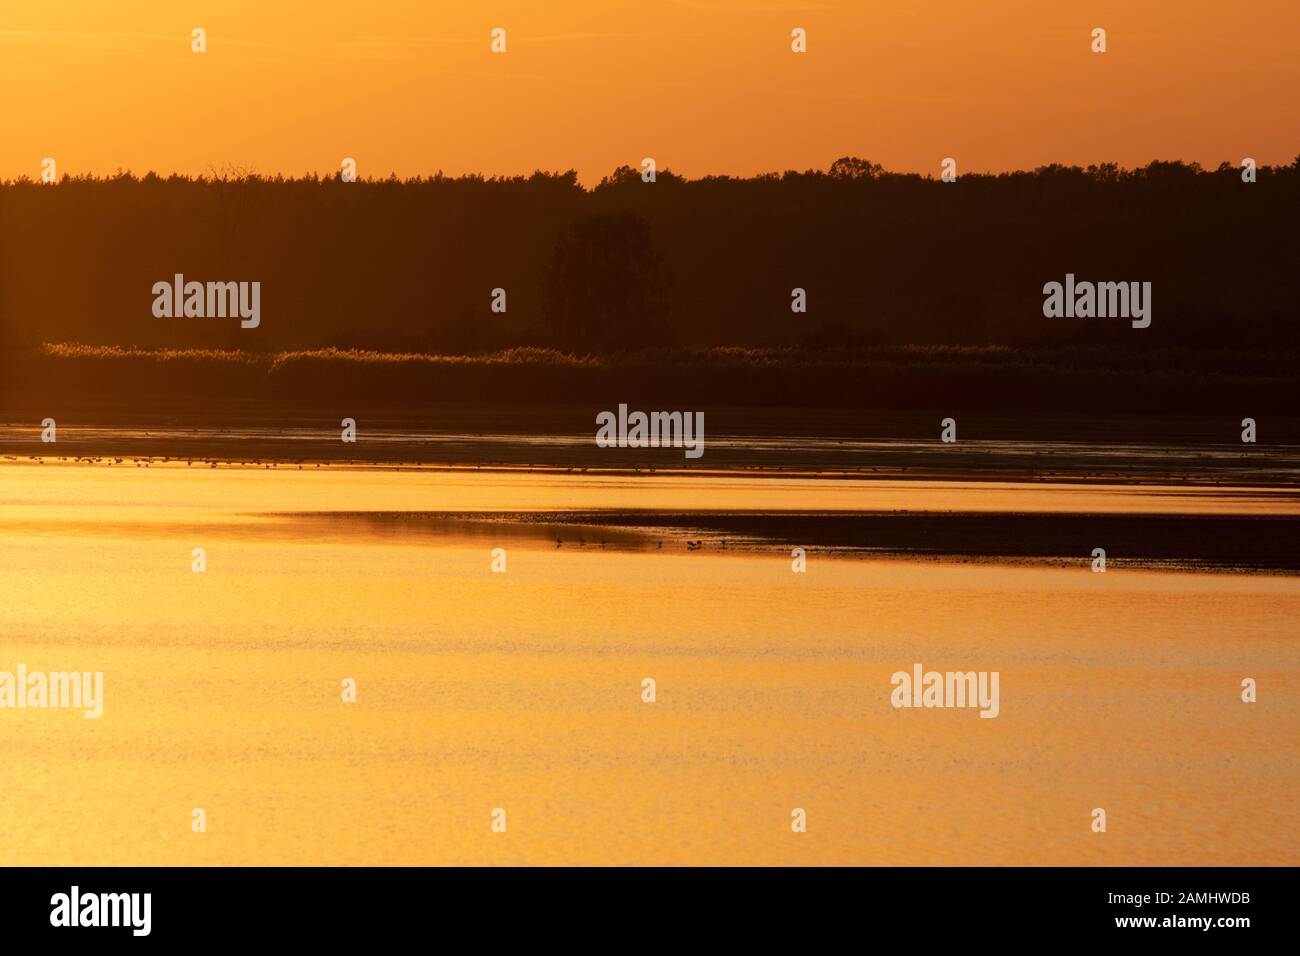 A golden sunset over a pond in Milicz area Stock Photo